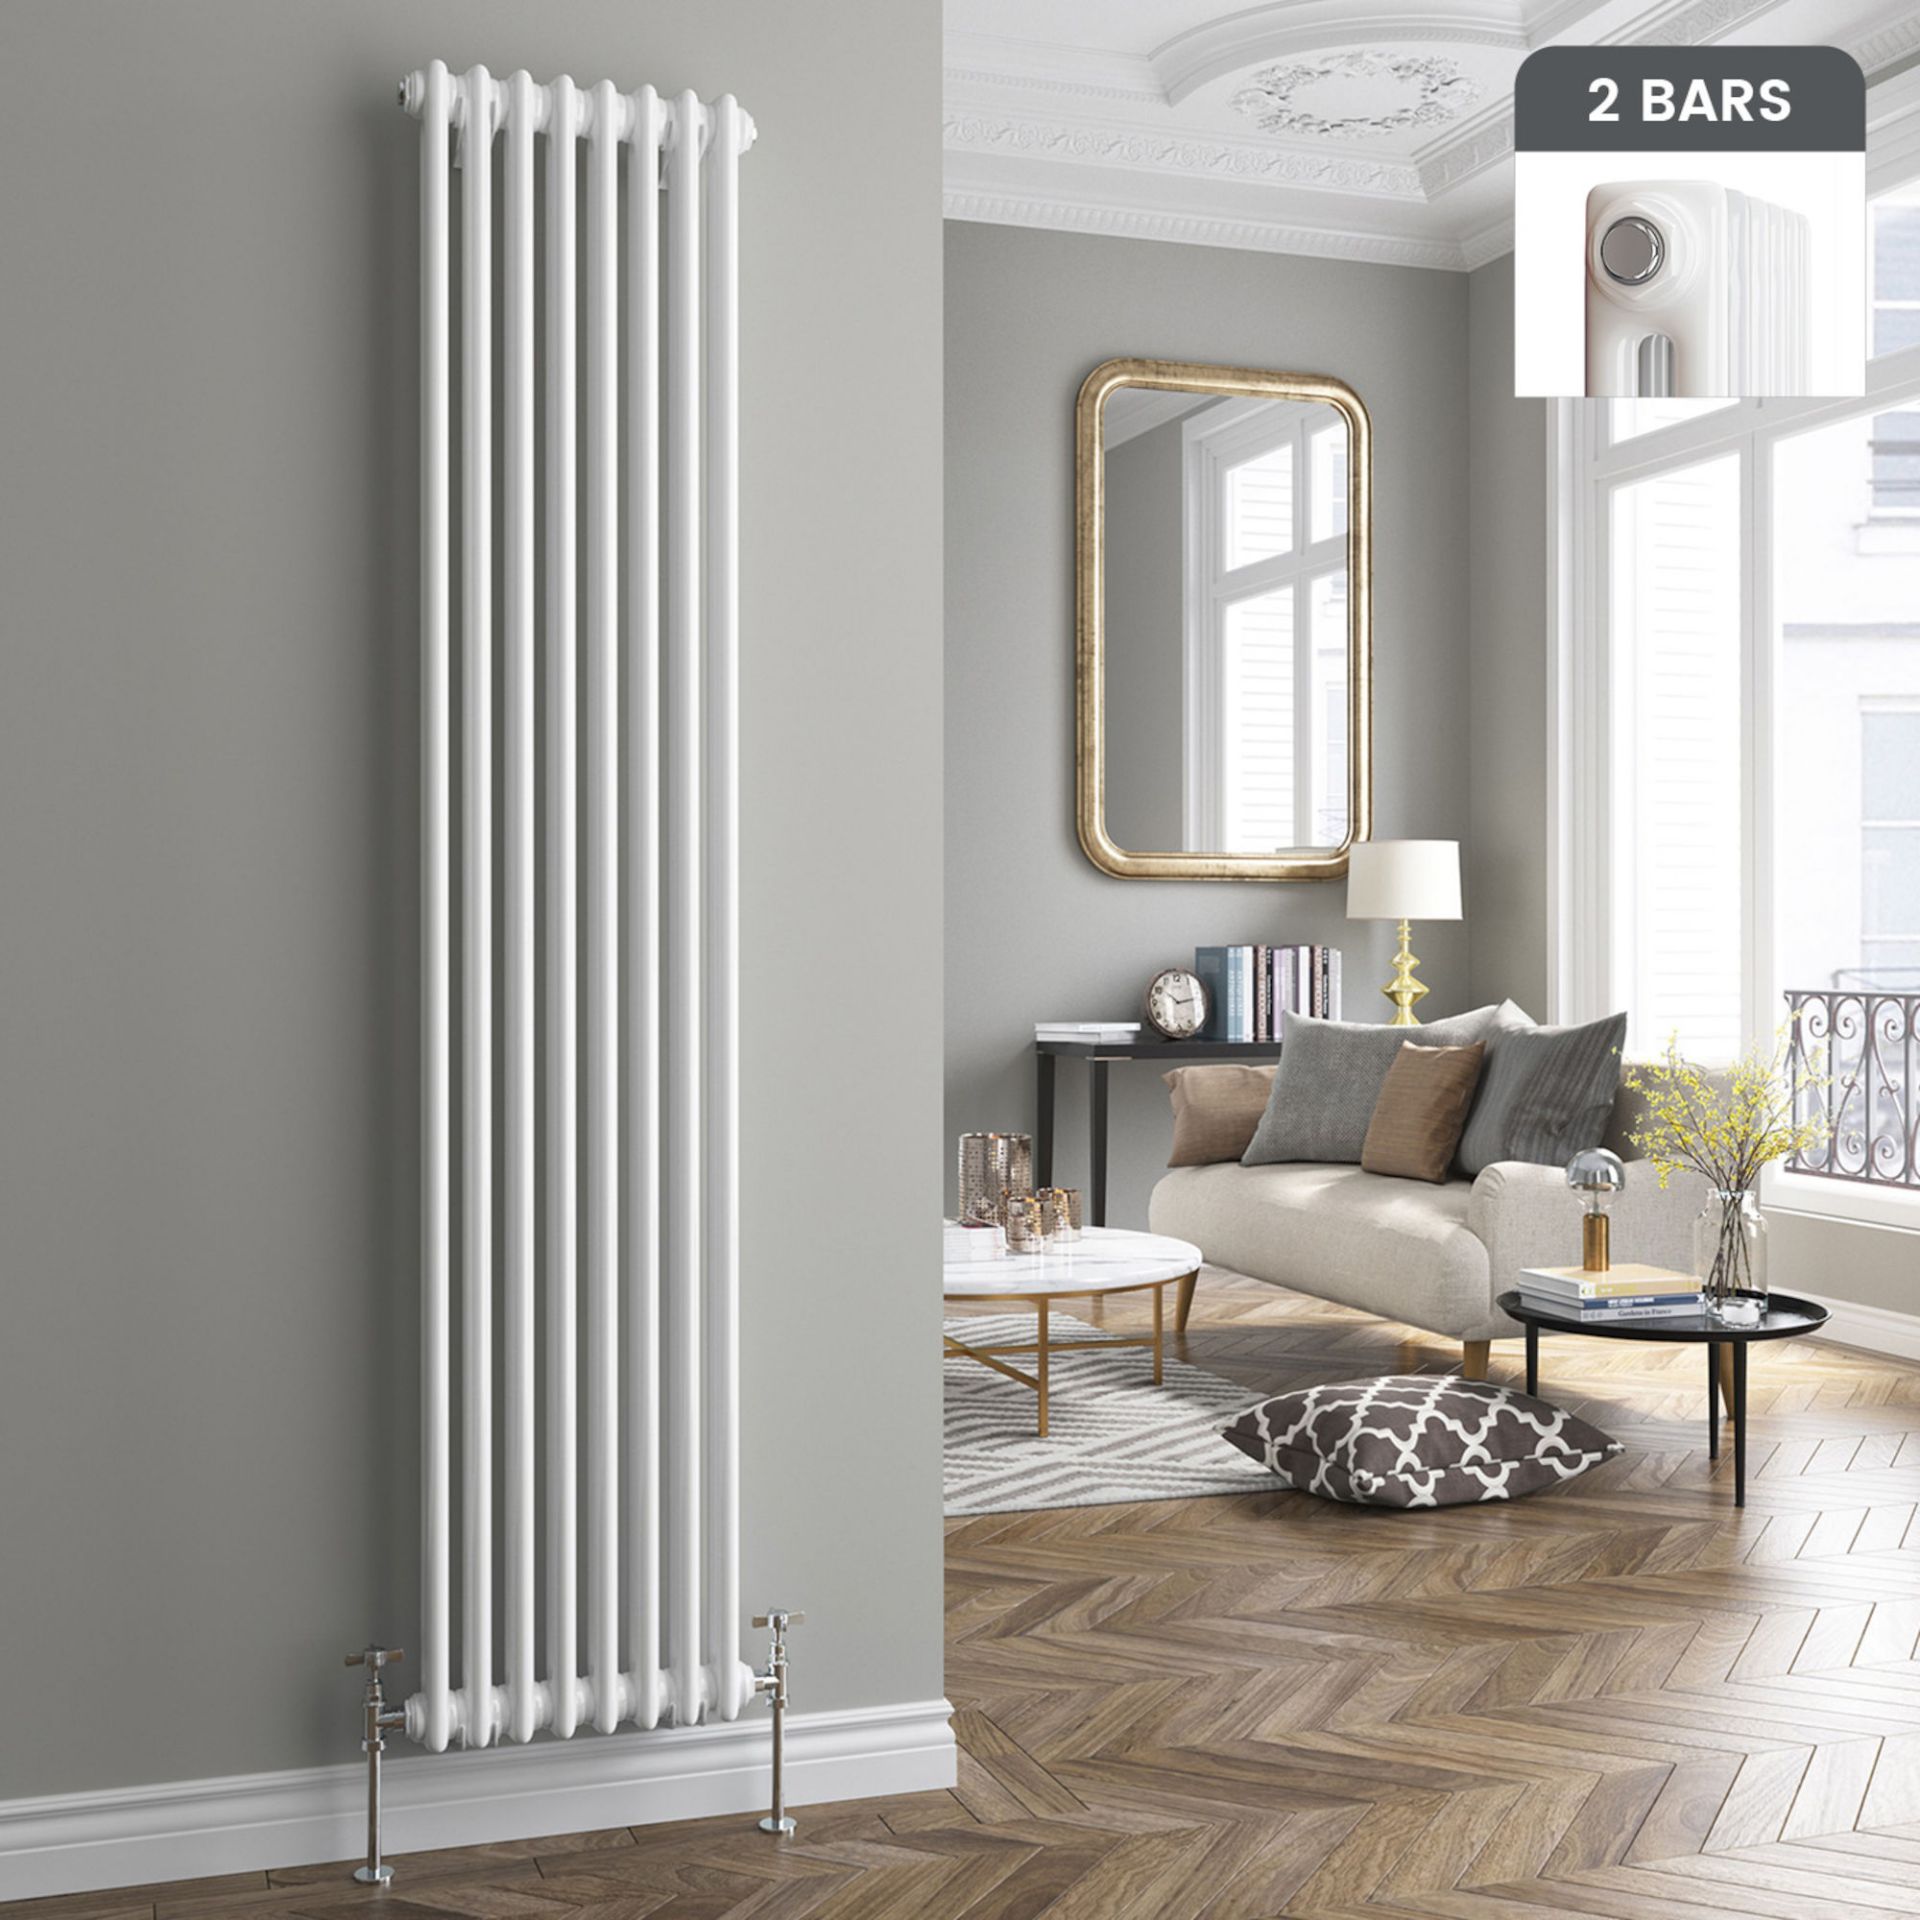 (SP238) 1800x380mm White Double Panel Vertical Colosseum Traditional Radiator. RRP £358.99. Made